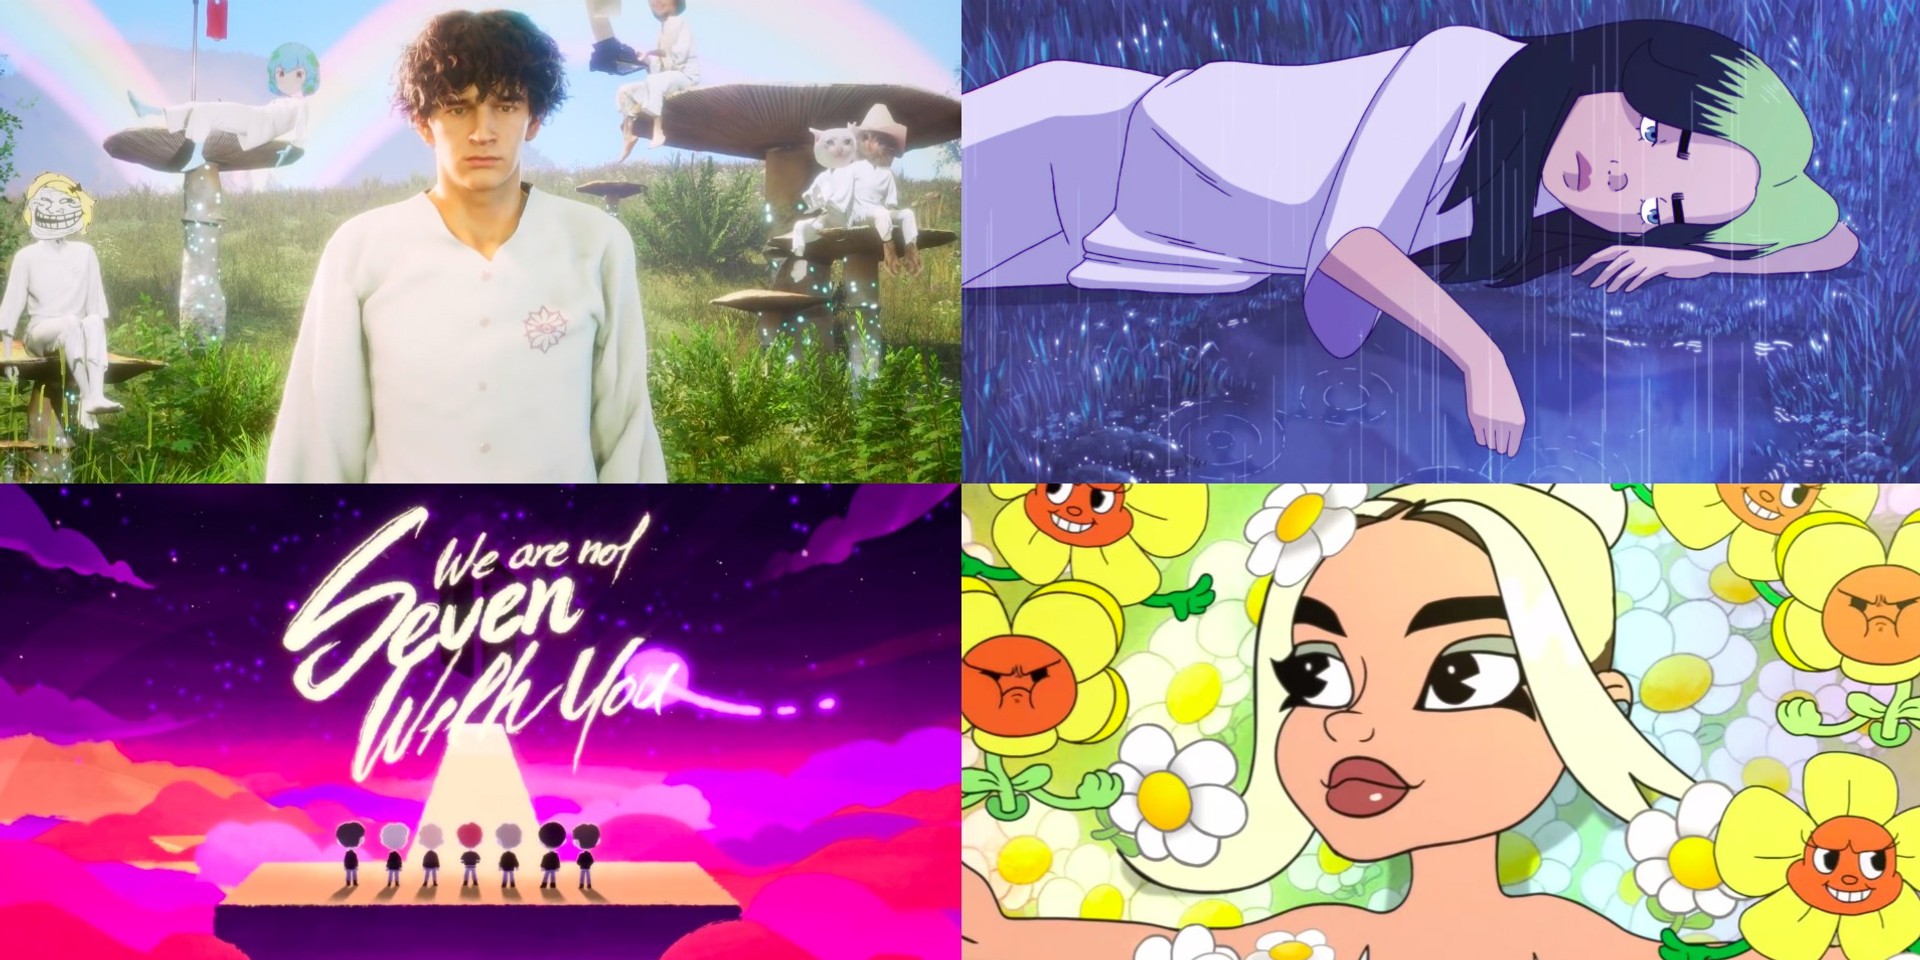 20 animated music videos from 2020 you should check out: BTS, Billie Eilish, Dua Lipa, and more